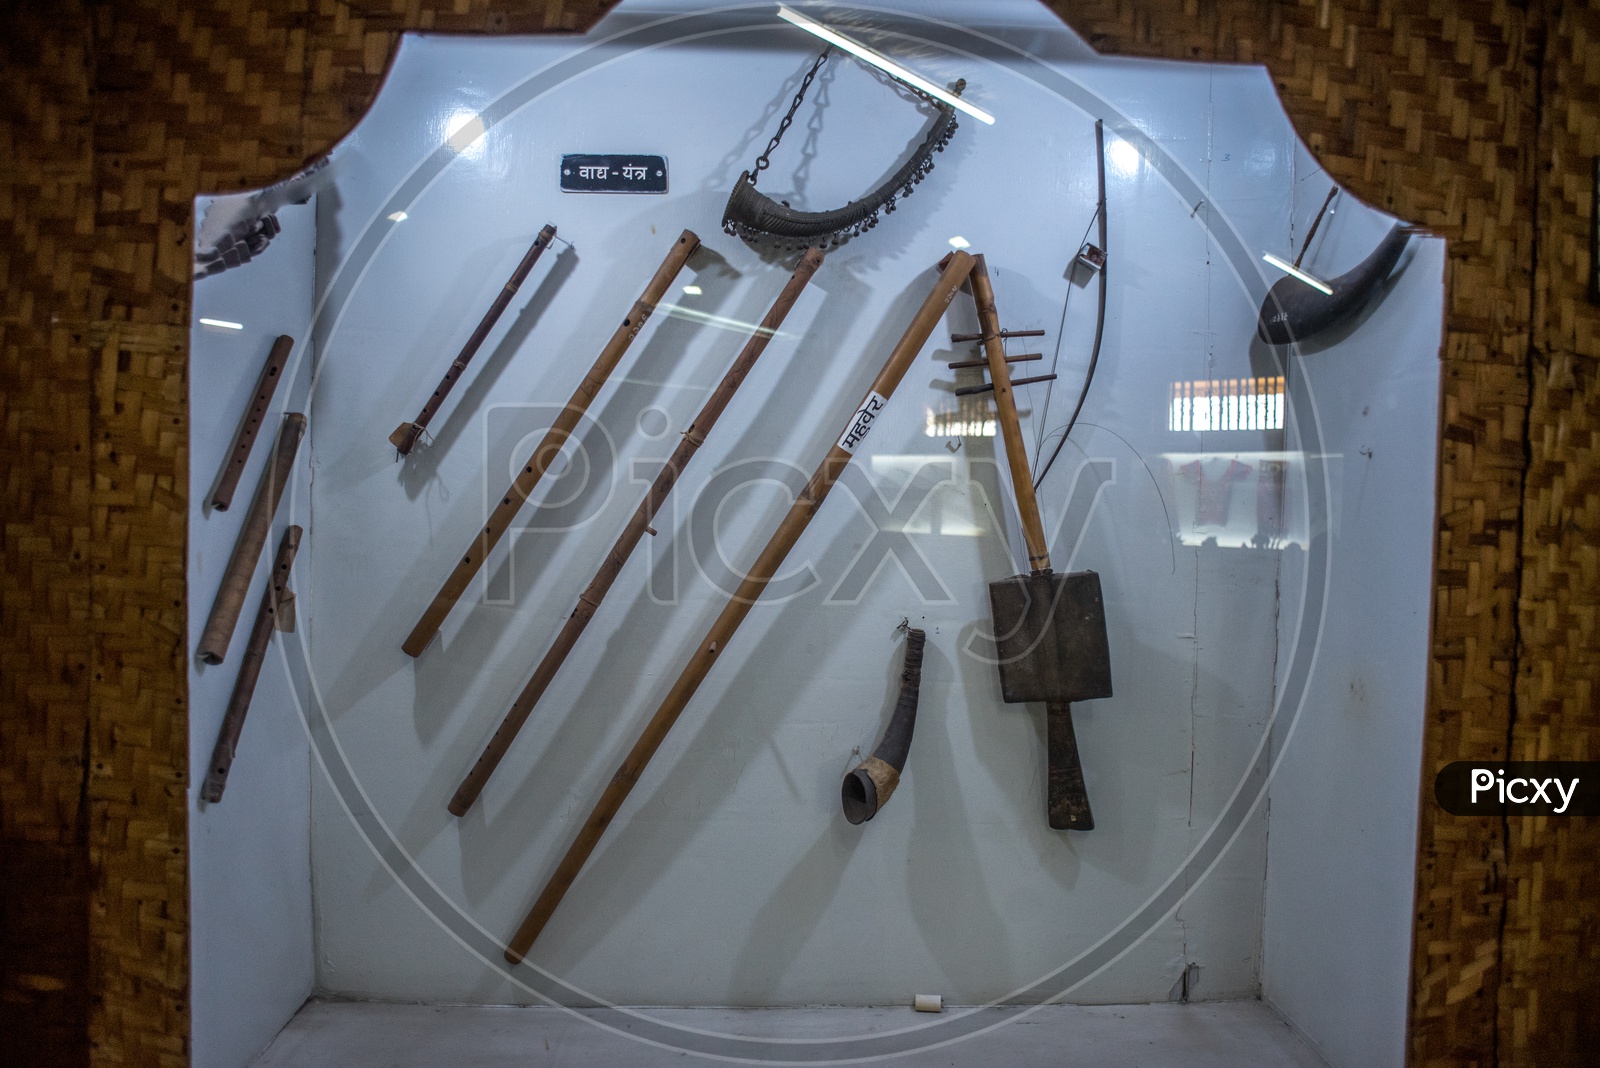 weapons of ancient tribes